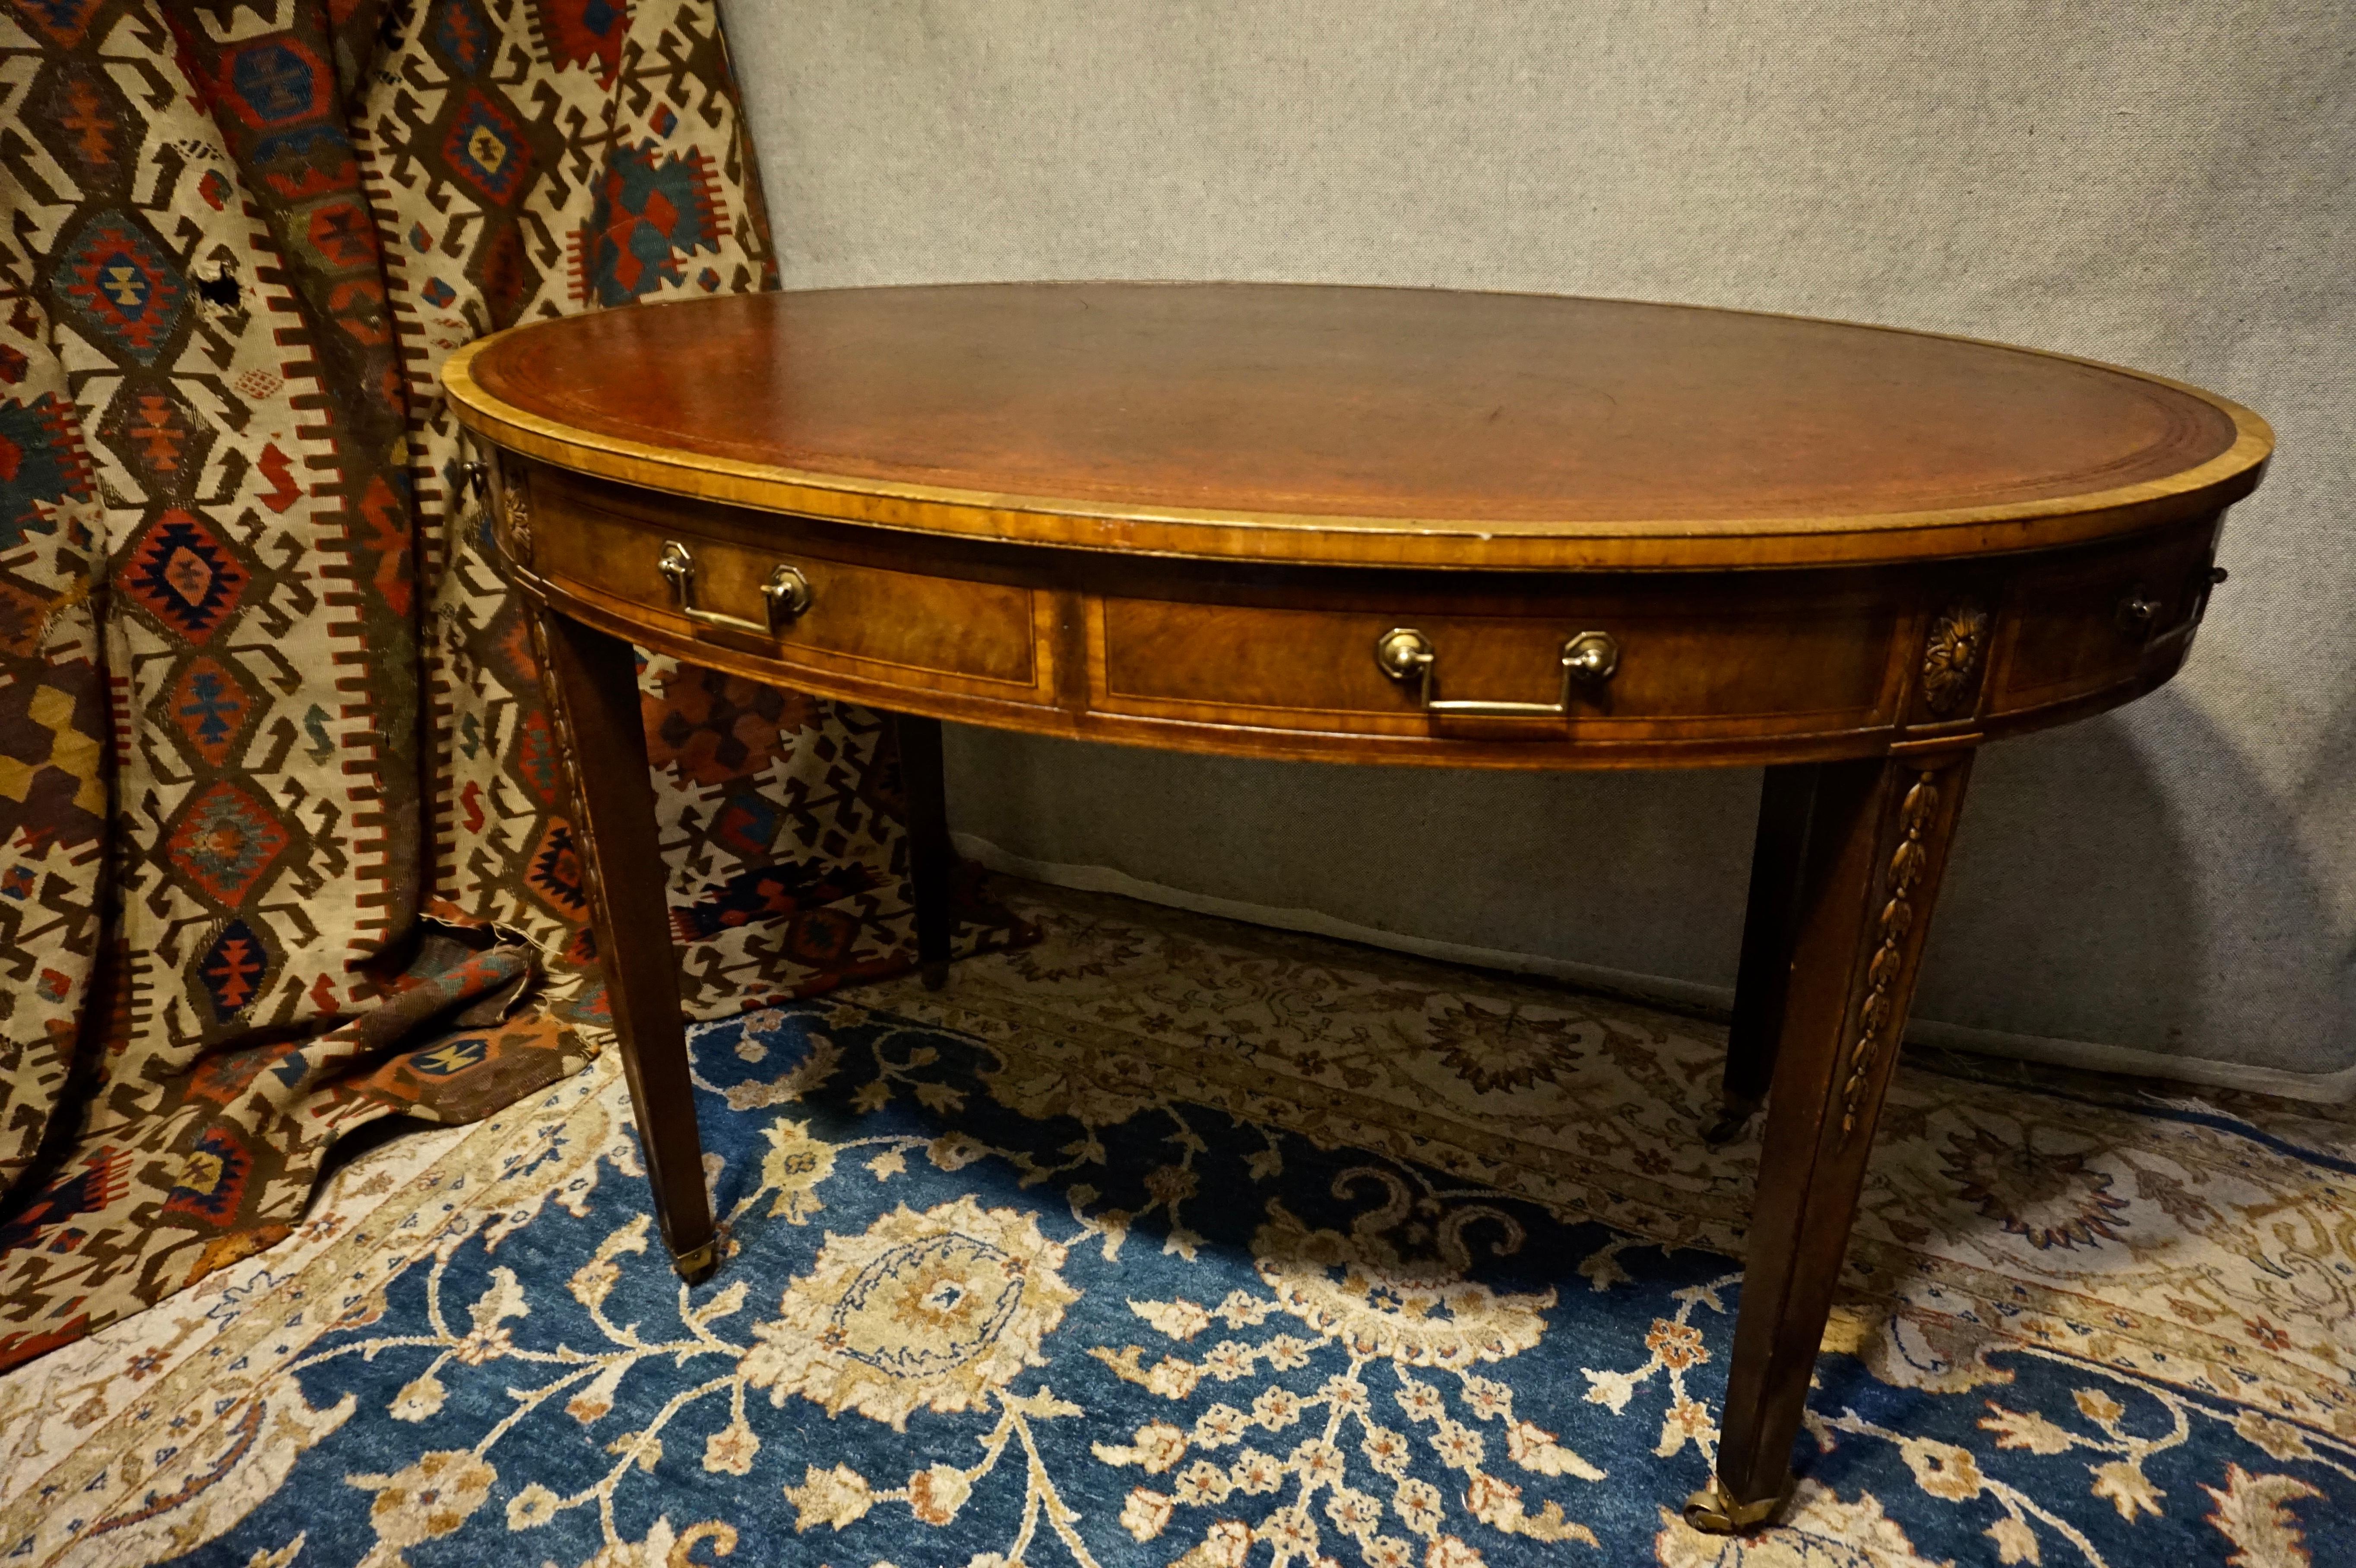 English Regency Revival oval leather writing table with old gilt laced leather top and brass hardware. Two drawers on one side with several mock drawers that wrap around the table. Hand carved. Casters at base. Solid wood. Excellent aesthetics. May